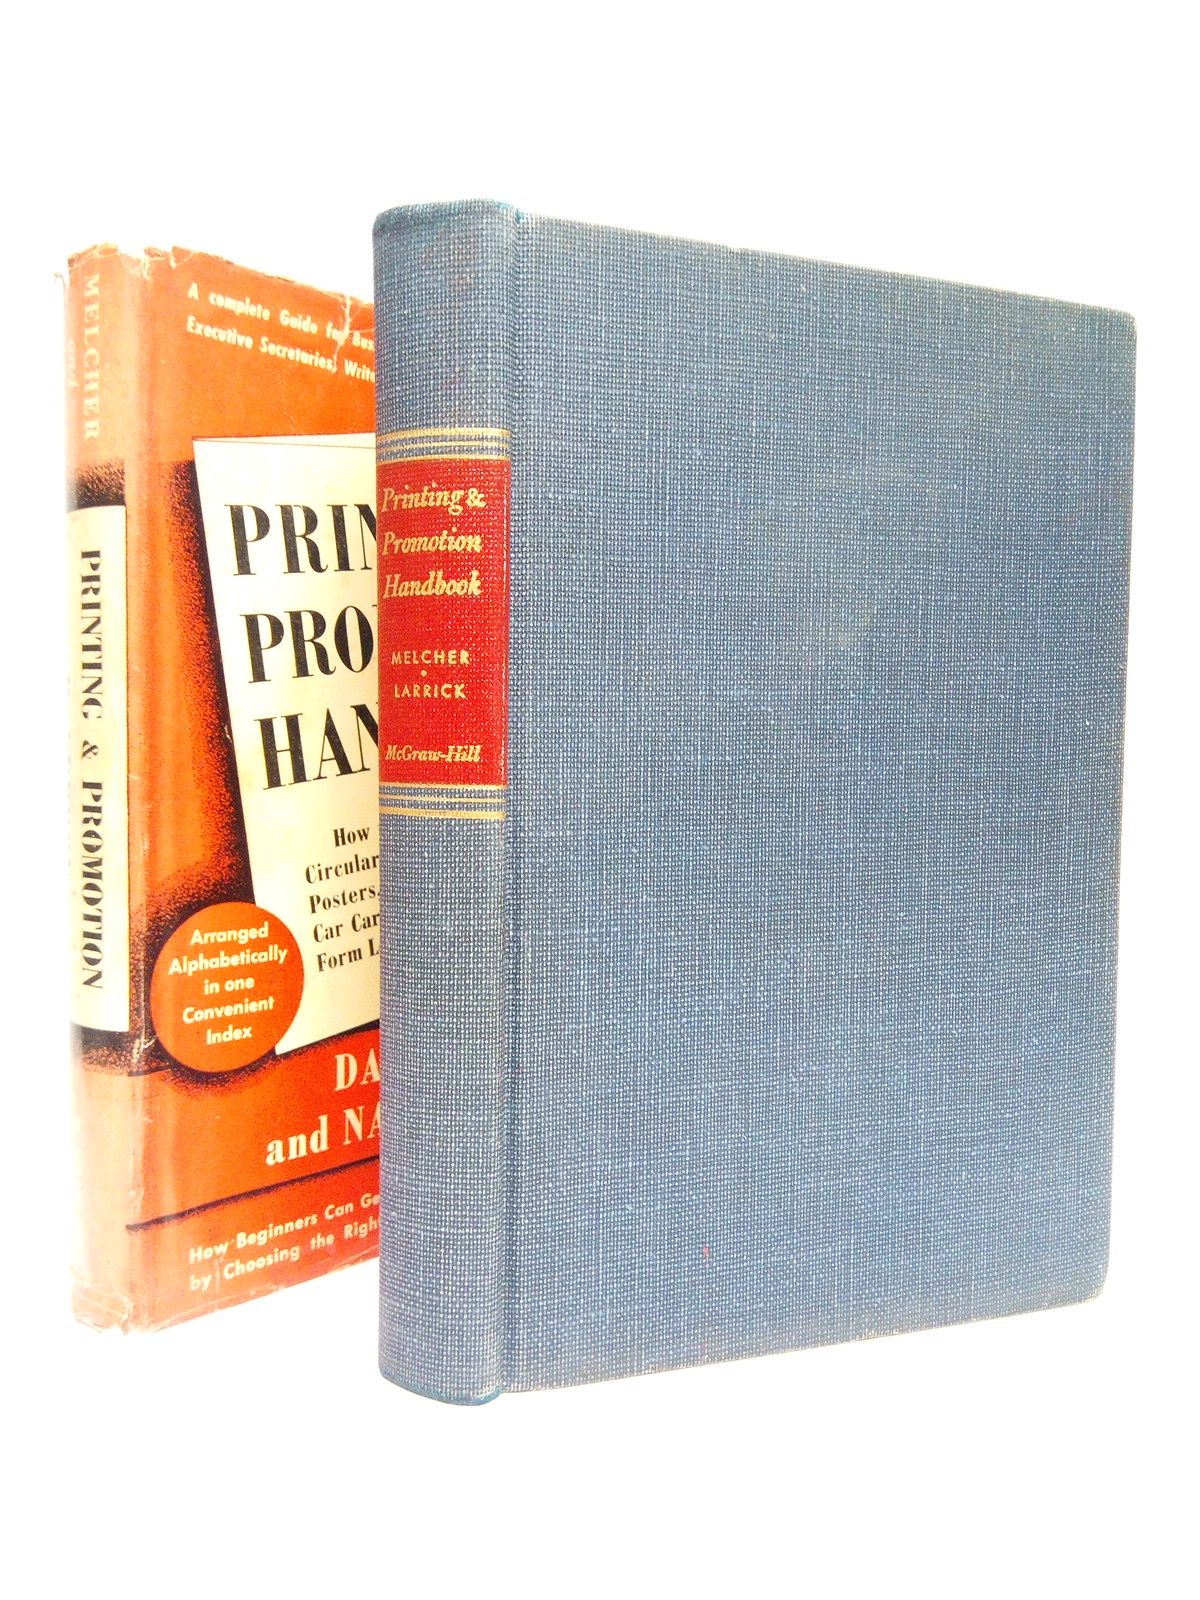 MELCHER, Daniel and Nancy Larrick - Printing and promotion handbook: How to plan, produce and use printing, advertising and direct mail